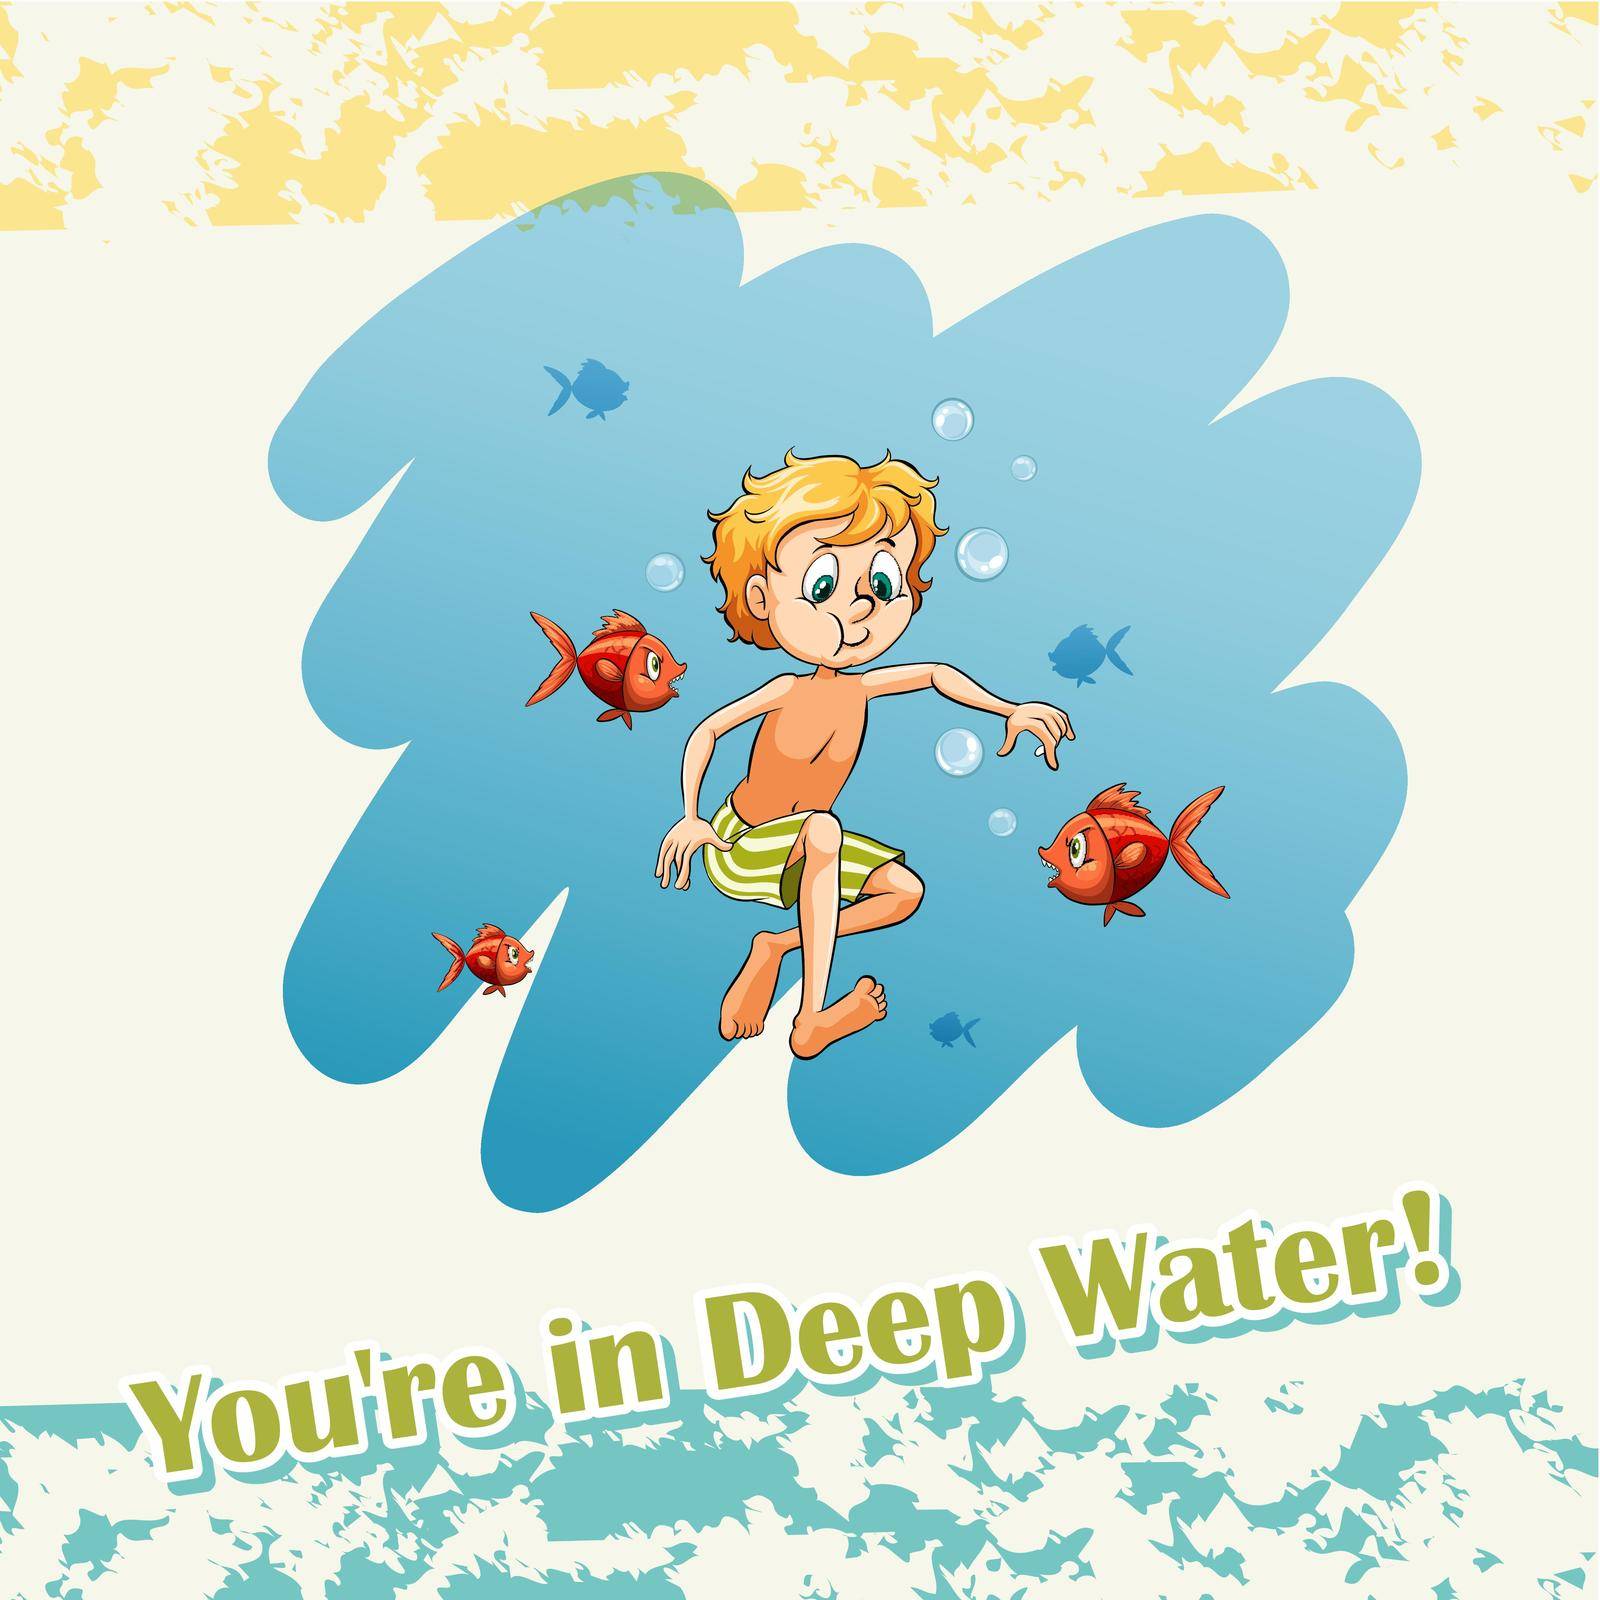 You are in deep water by iimages